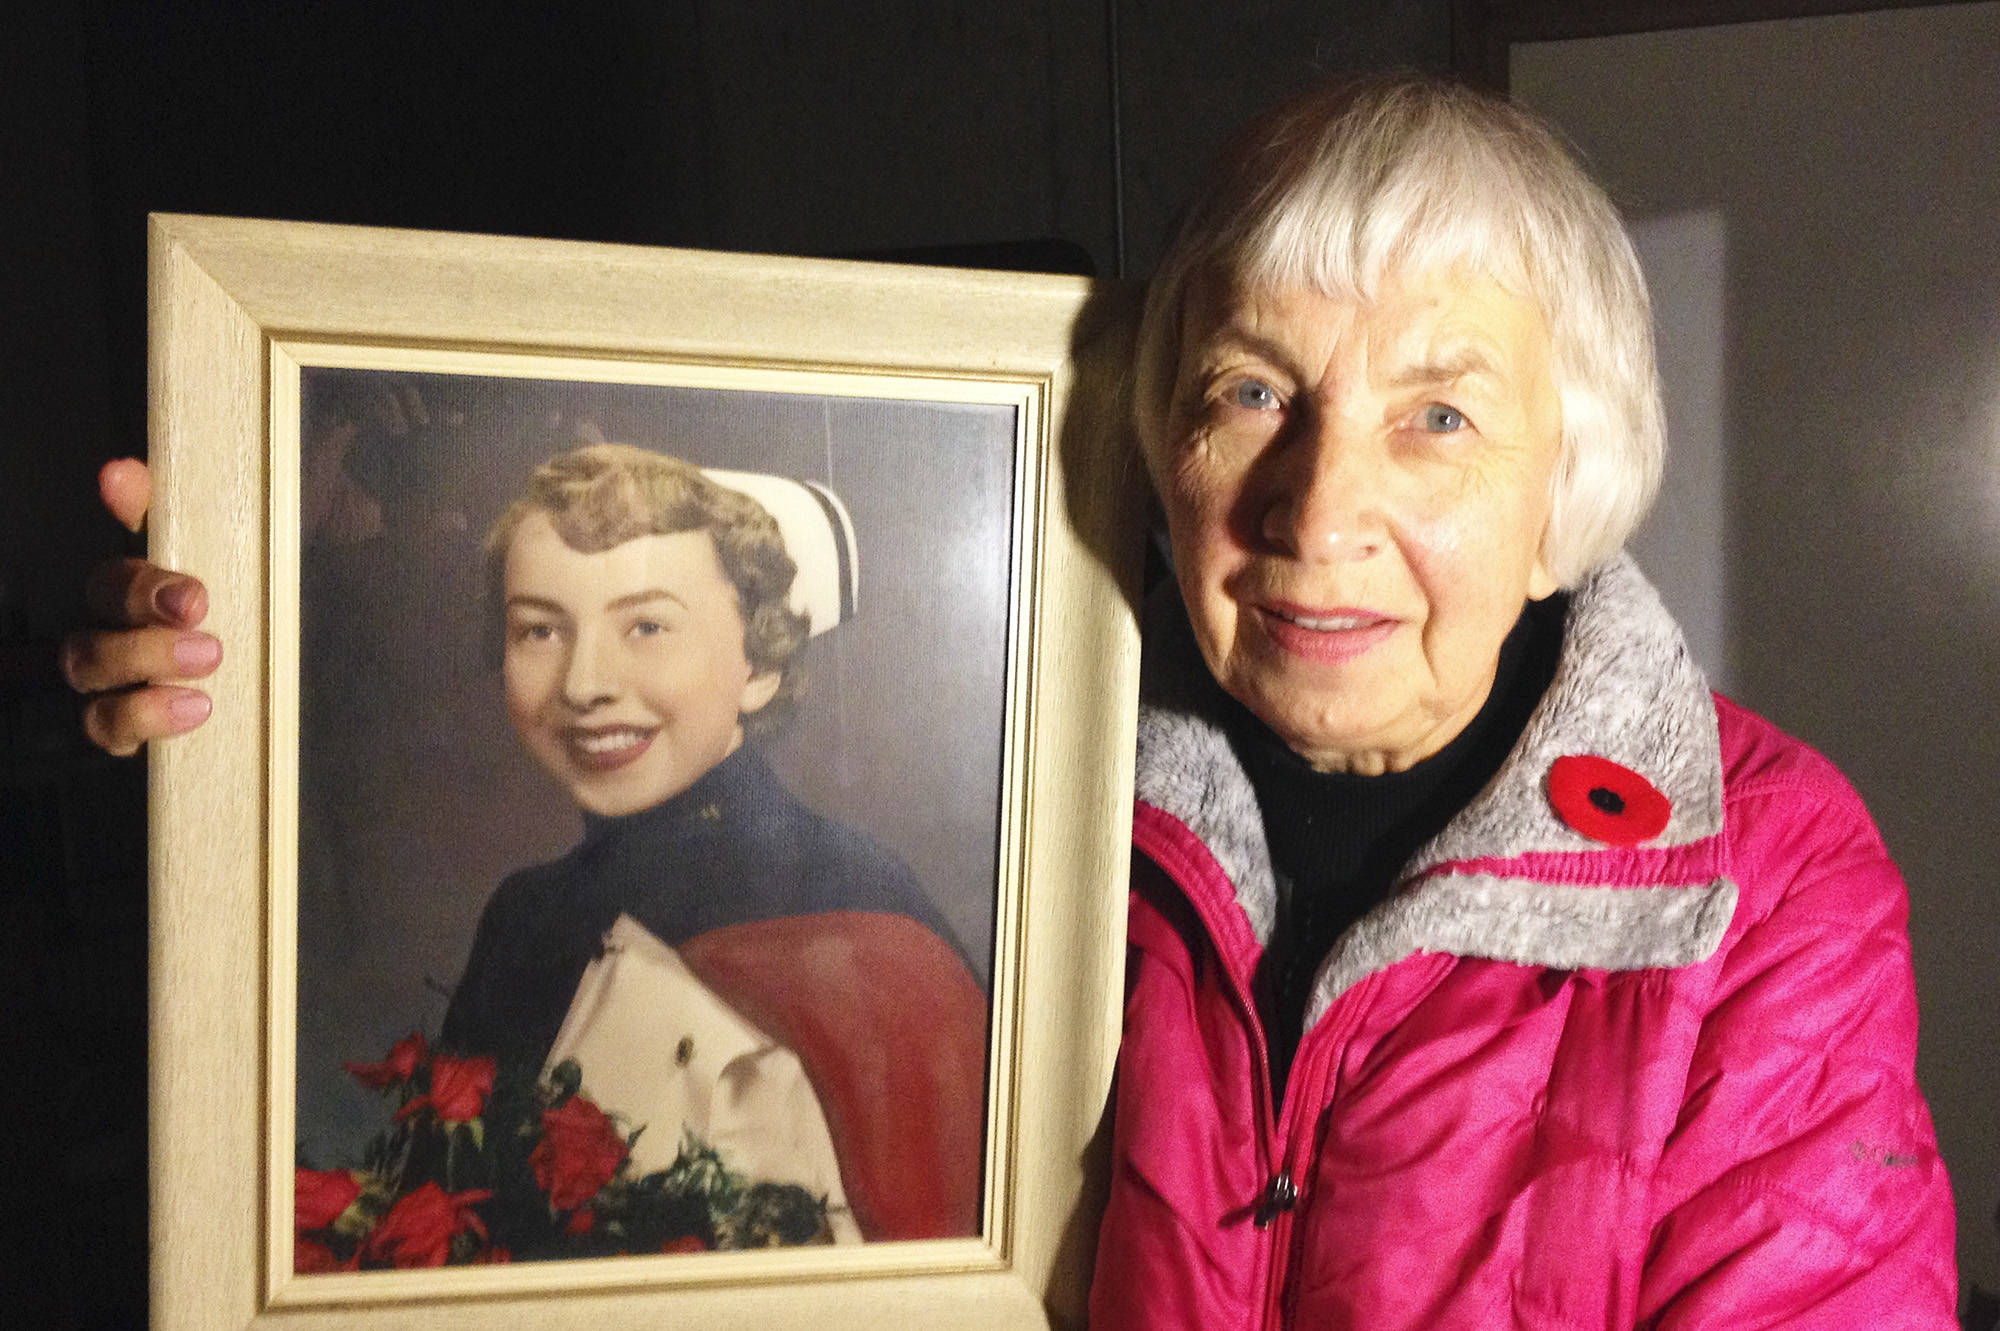 Image credit: Scales family                                Sally Scales, who ended her life under the new Medical Assistance in Dying (MAiD) law, holds a photo of herself as a nurse in earlier years.